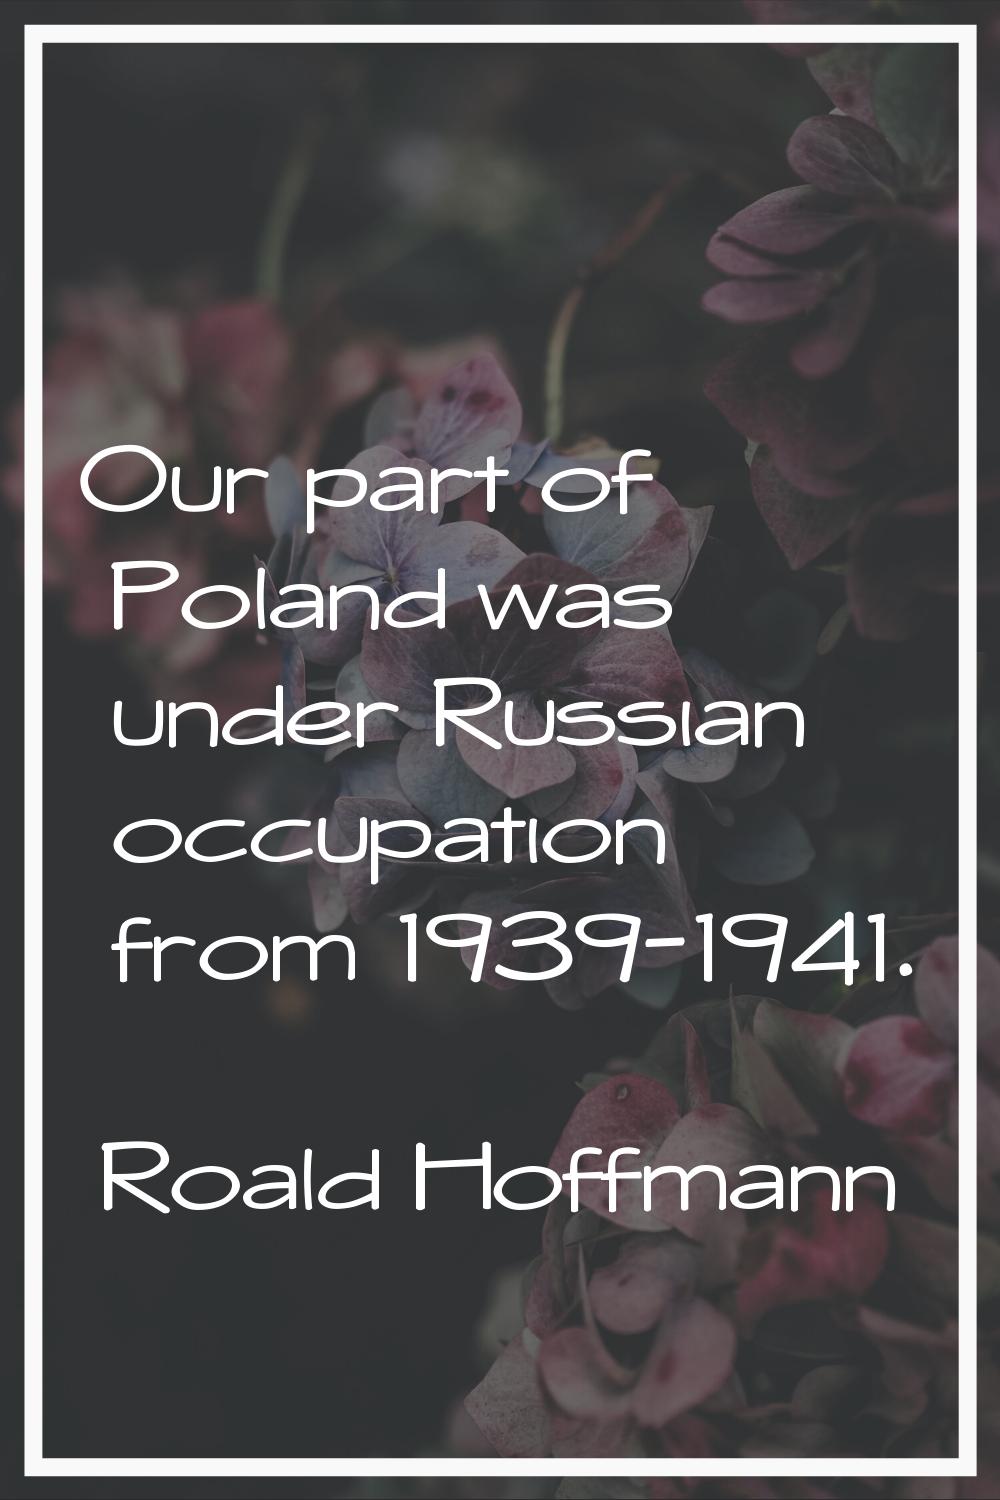 Our part of Poland was under Russian occupation from 1939-1941.